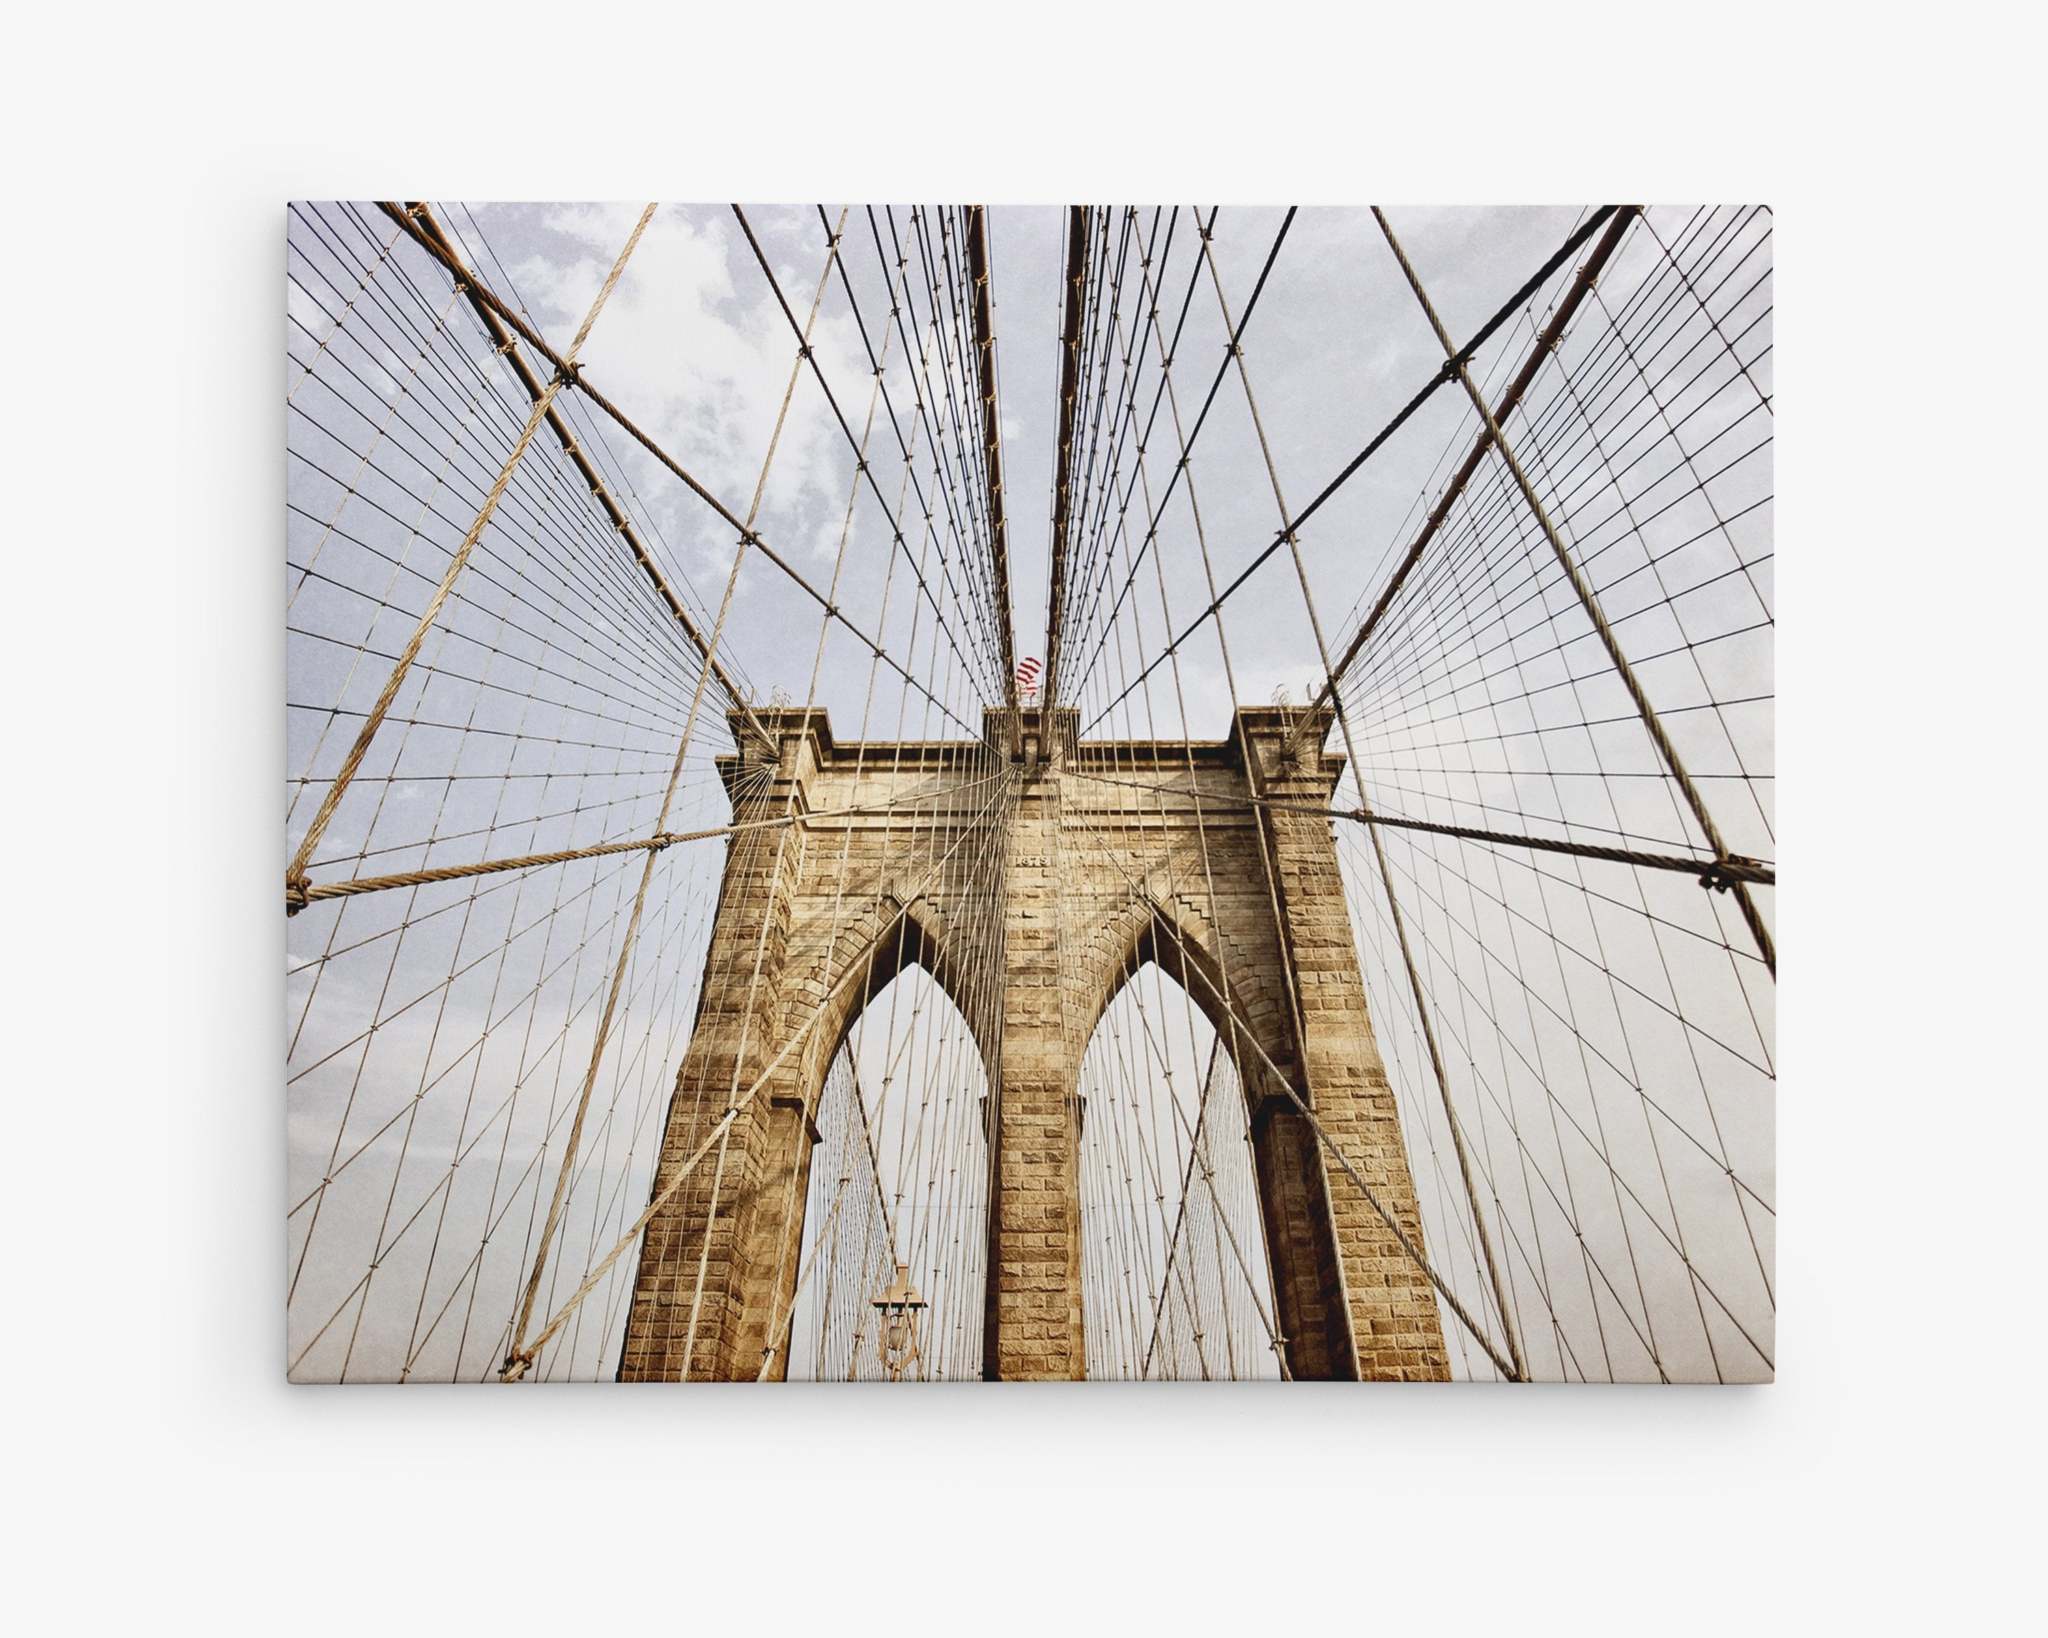 A low-angle view of the Brooklyn Bridge's stone arches and intricate cable system against a cloudy sky. The symmetrical design and perspective emphasize the bridge's architectural details and grandeur, all captured on premium artist-grade canvas for an exquisite finish with Offley Green's New York City Canvas Wall Art, 'Brooklyn Wires'.